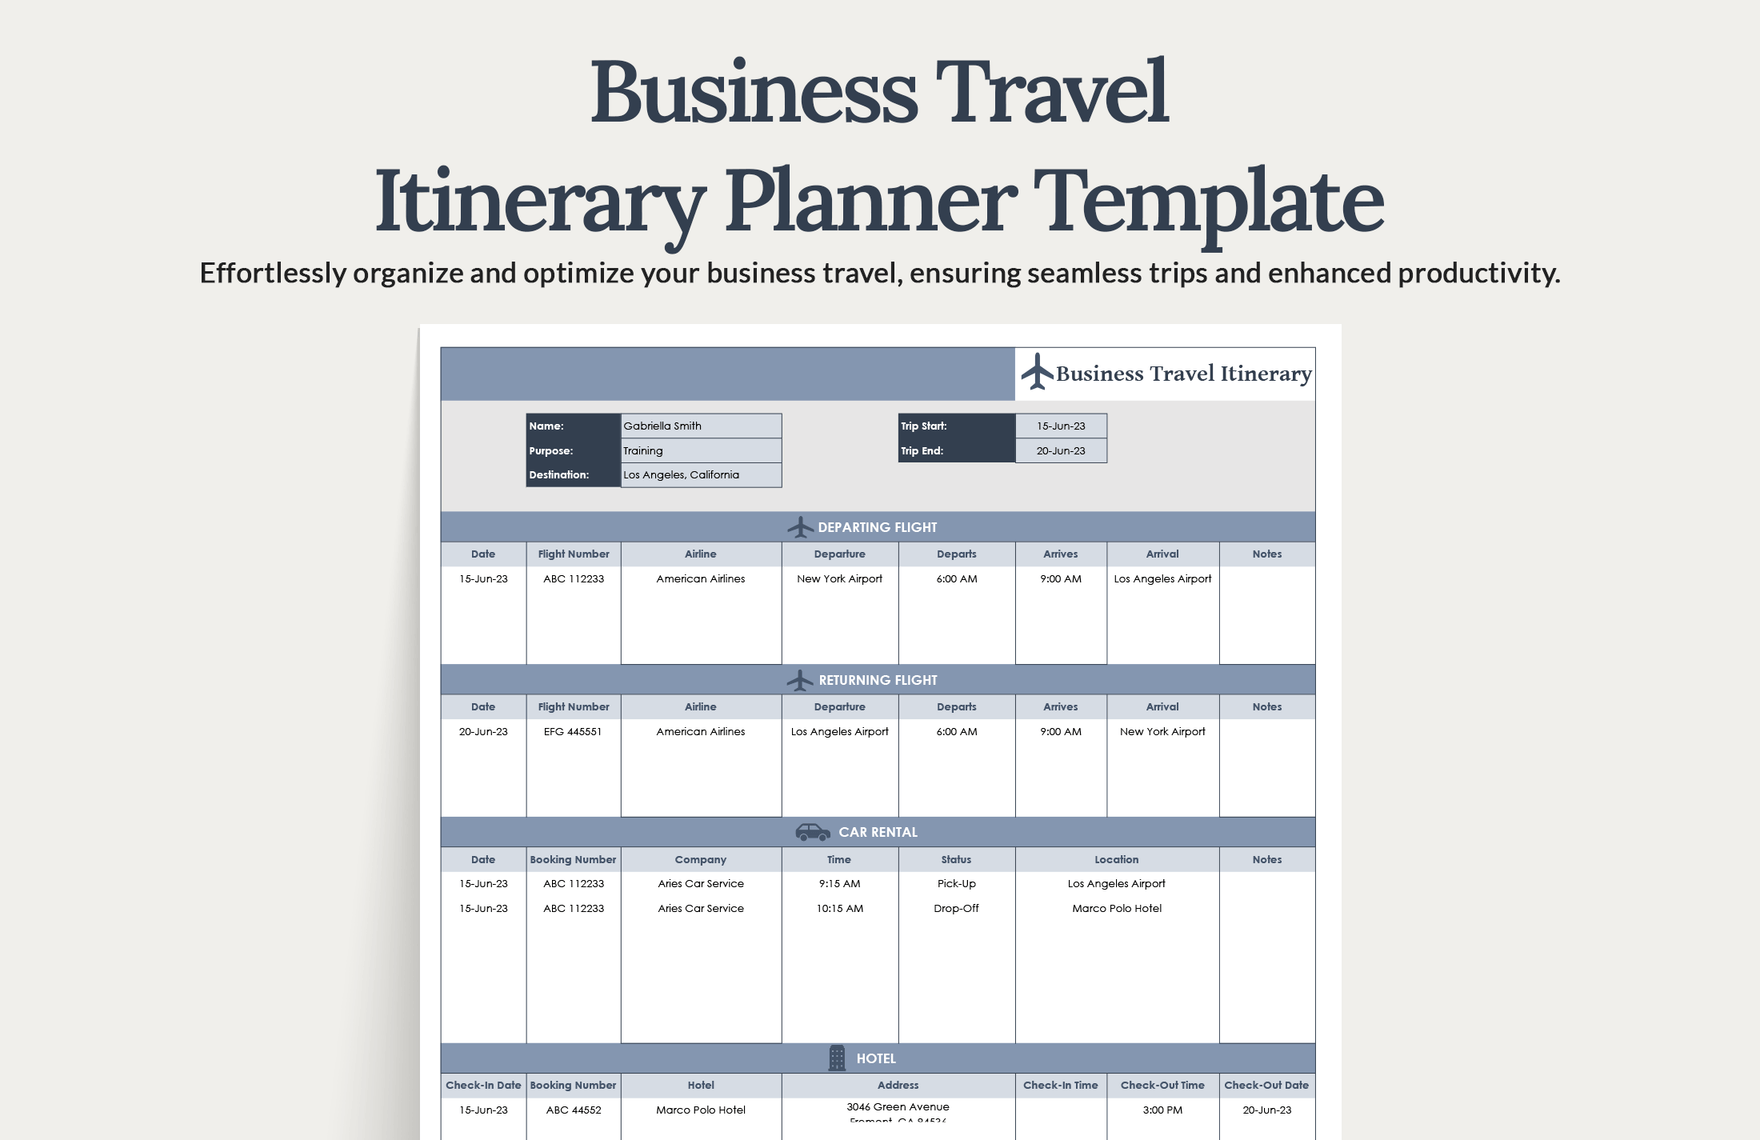 Business Travel Itinerary Planner Template